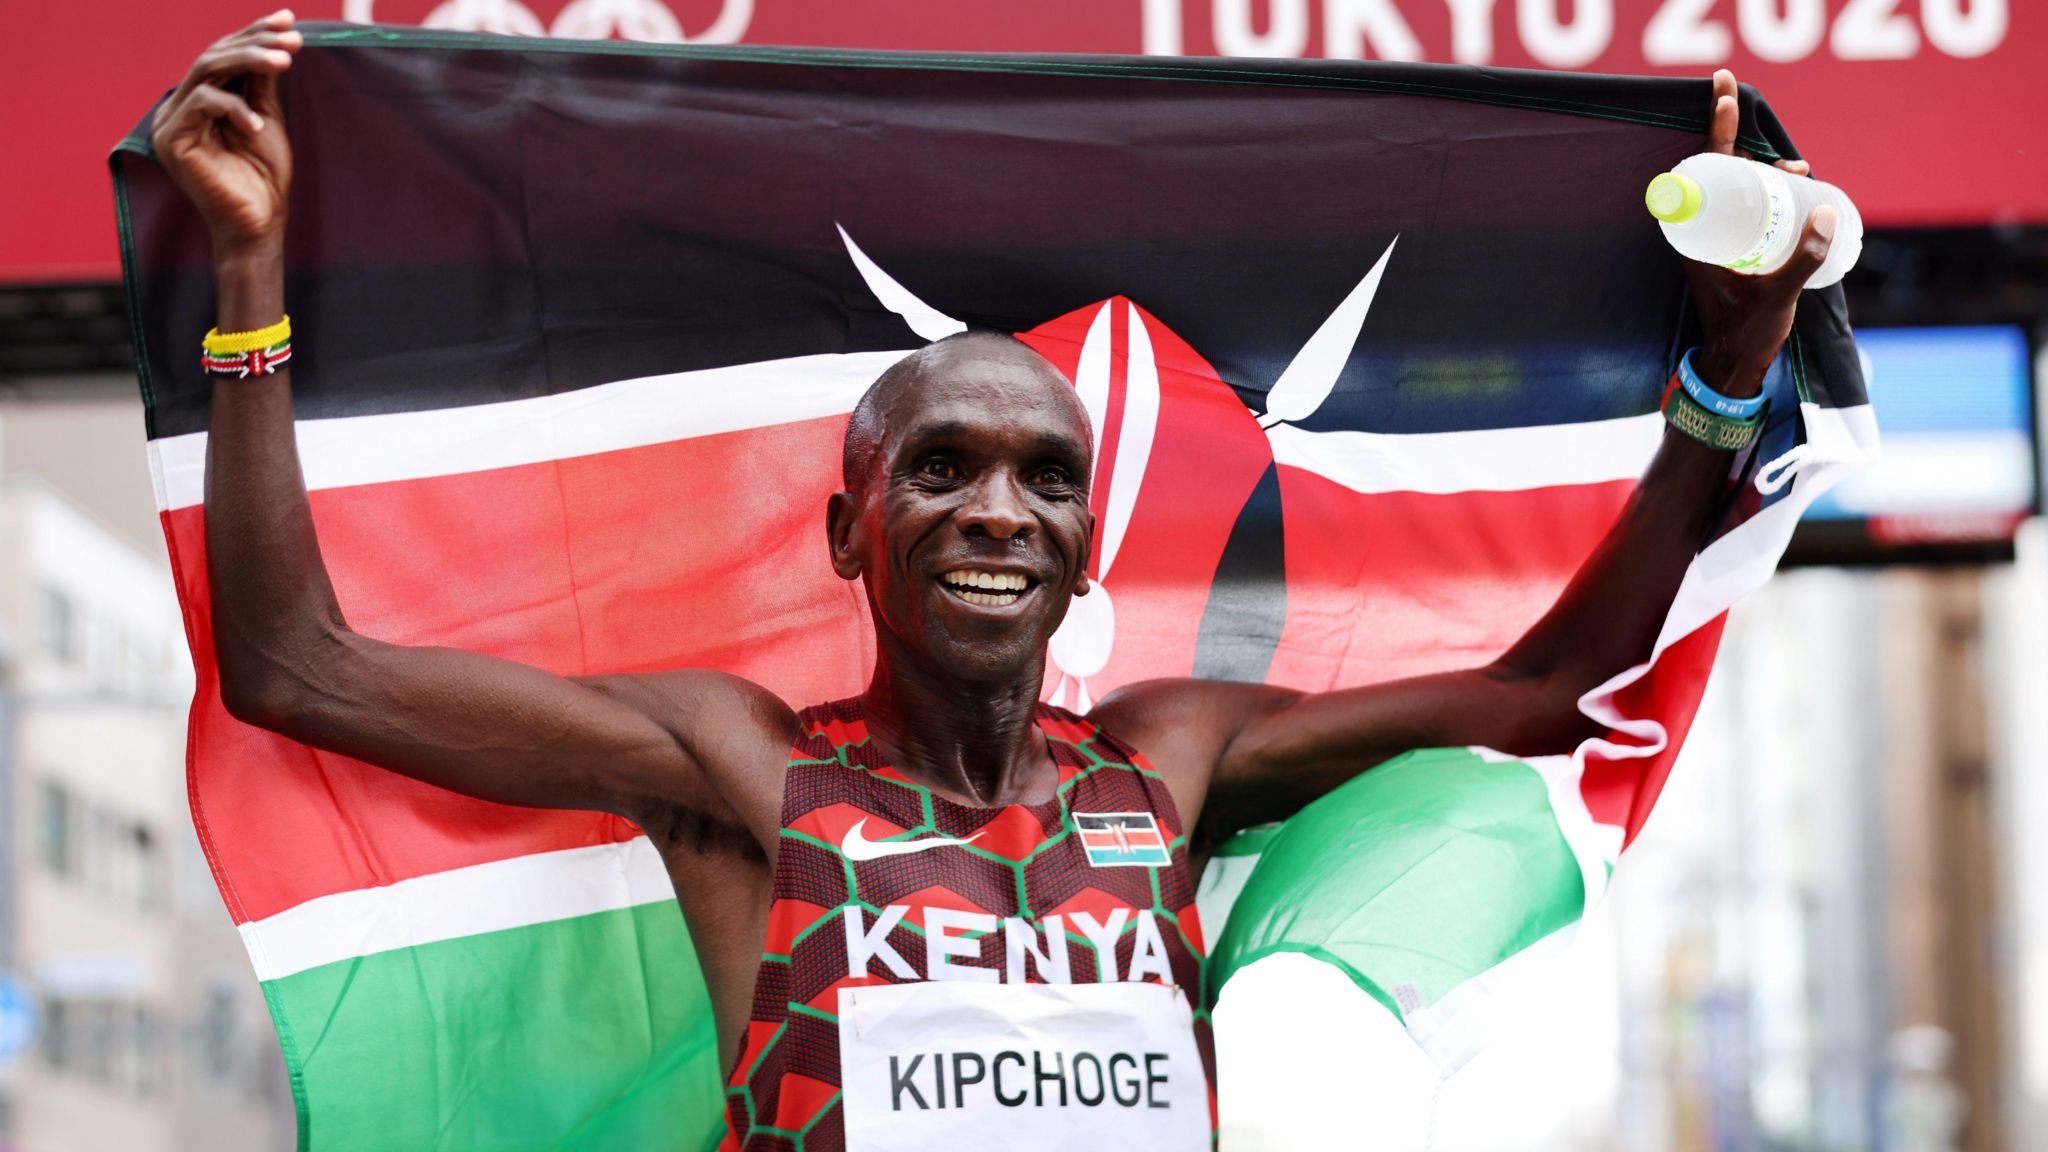 Eliud Kipchoge poses with a Kenyan flag as he celebrates winning the marathon at the Tokyo 2020 Olympic Games